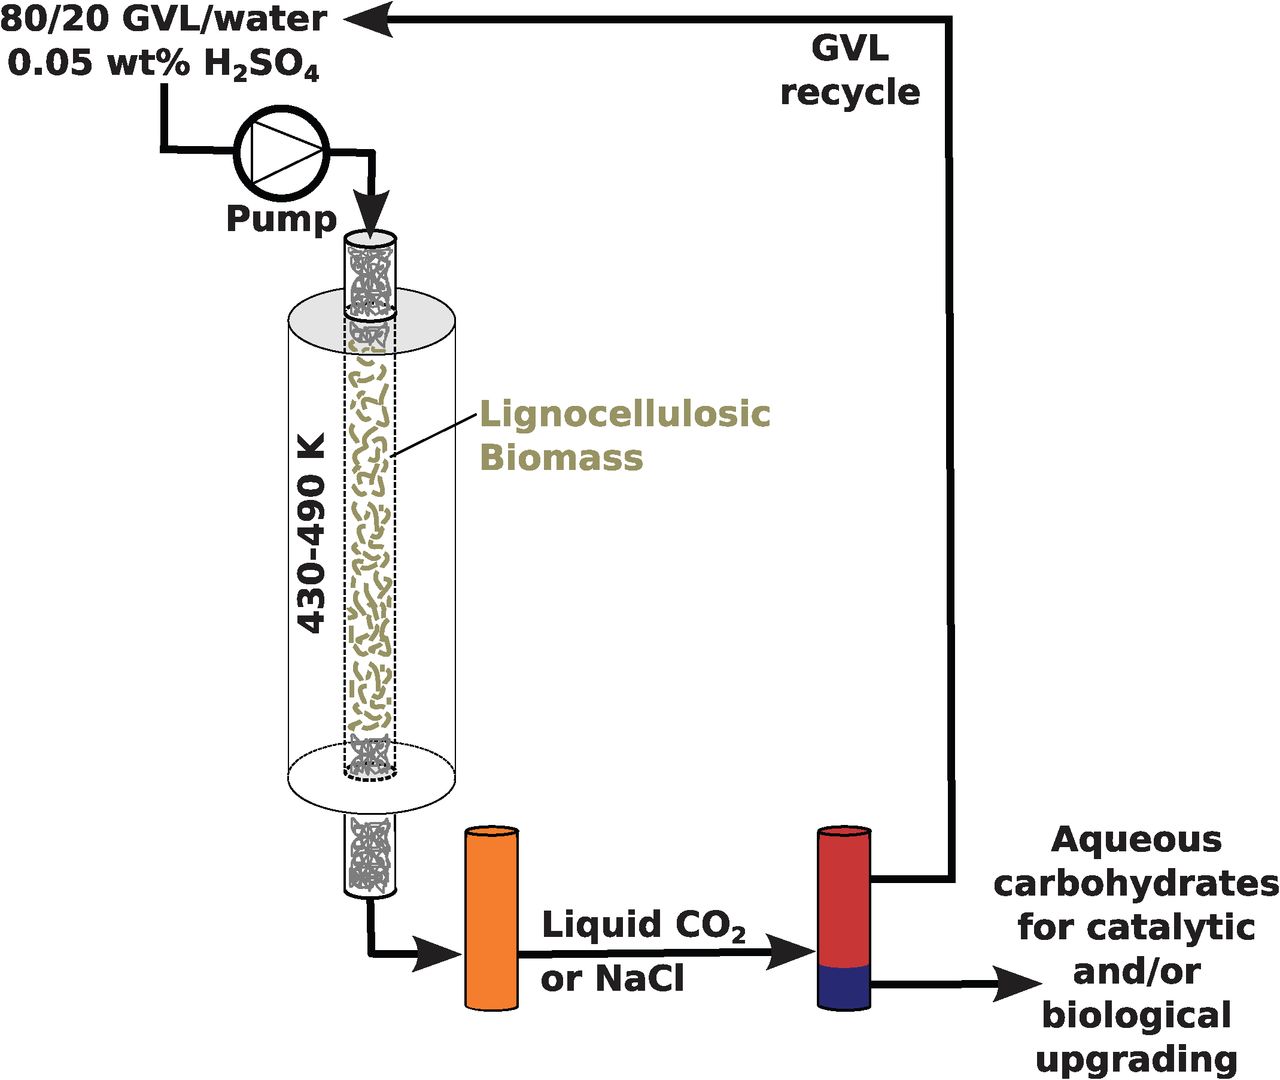 Overview of the aqueous-phase soluble-sugar production using GVL as a solvent.